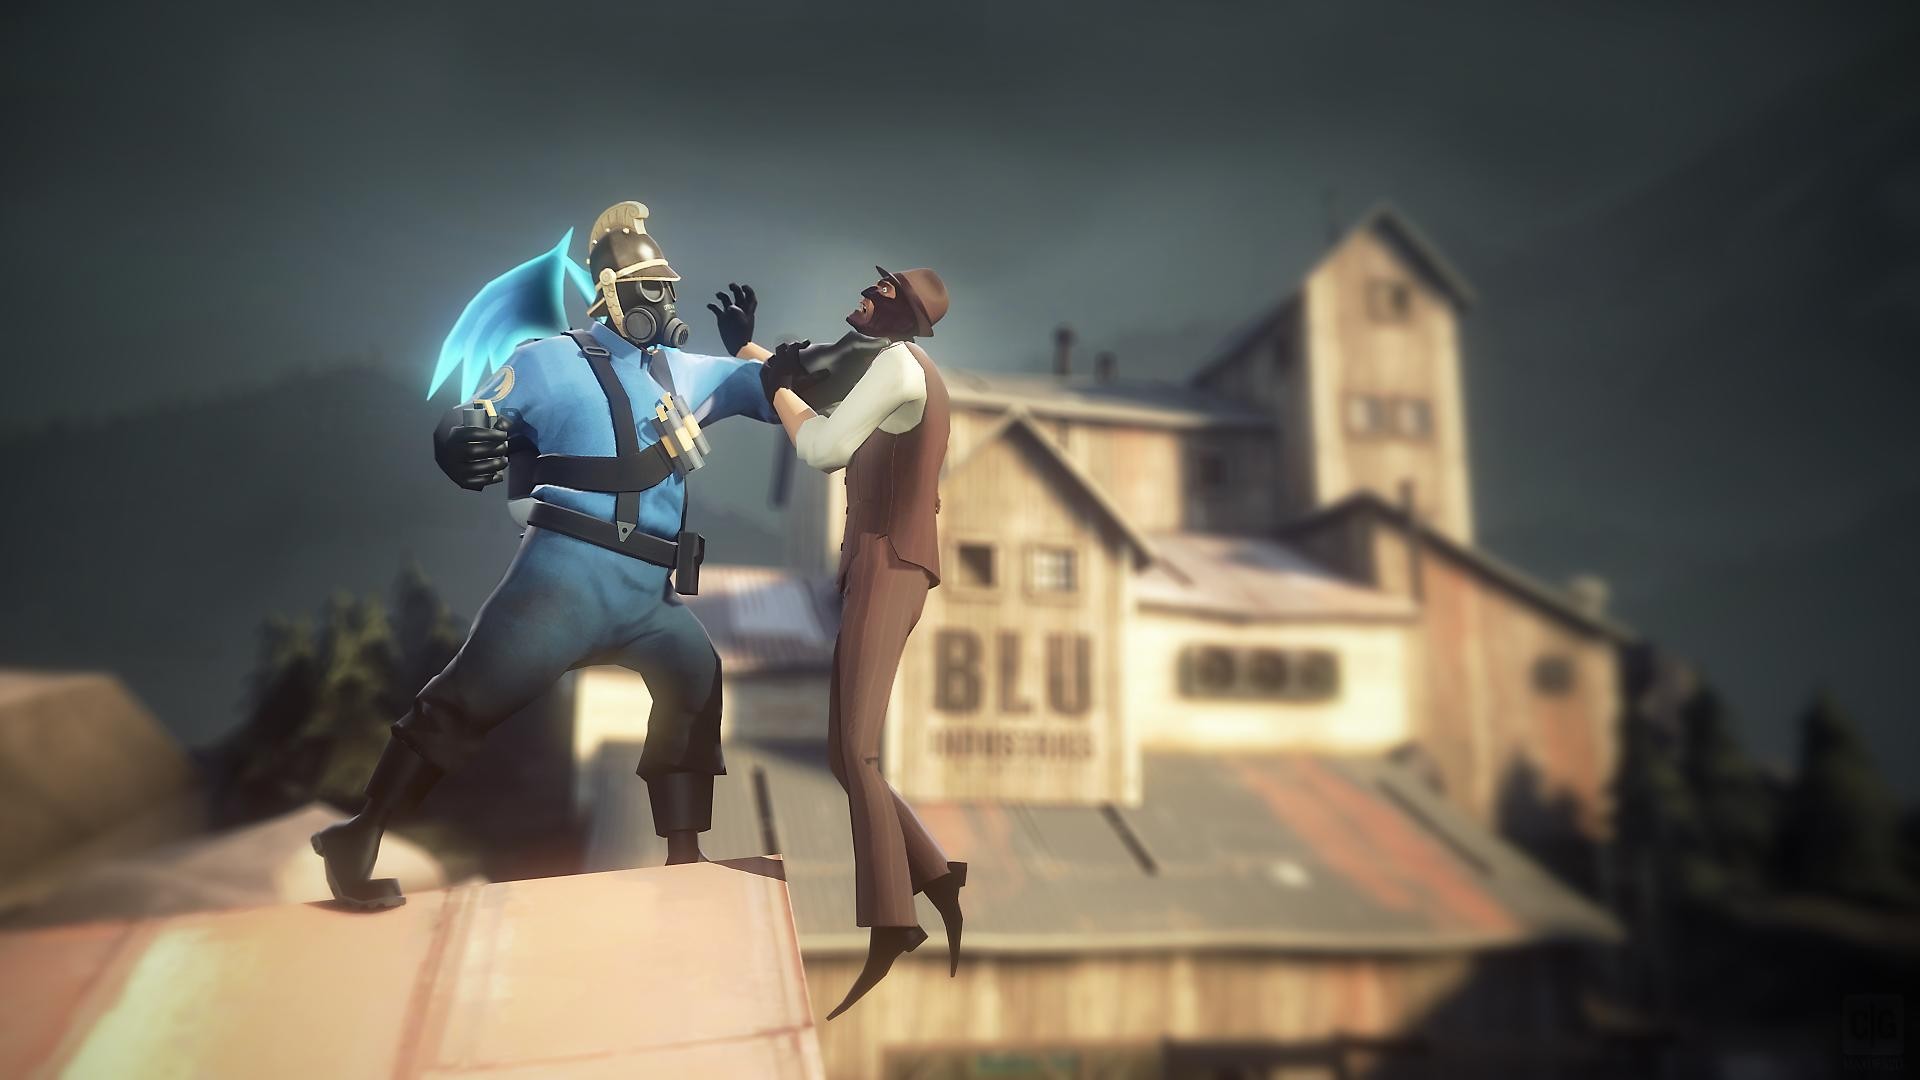 General 1920x1080 Pyro (TF2) Team Fortress 2 video games PC gaming 2007 (Year) Valve Corporation